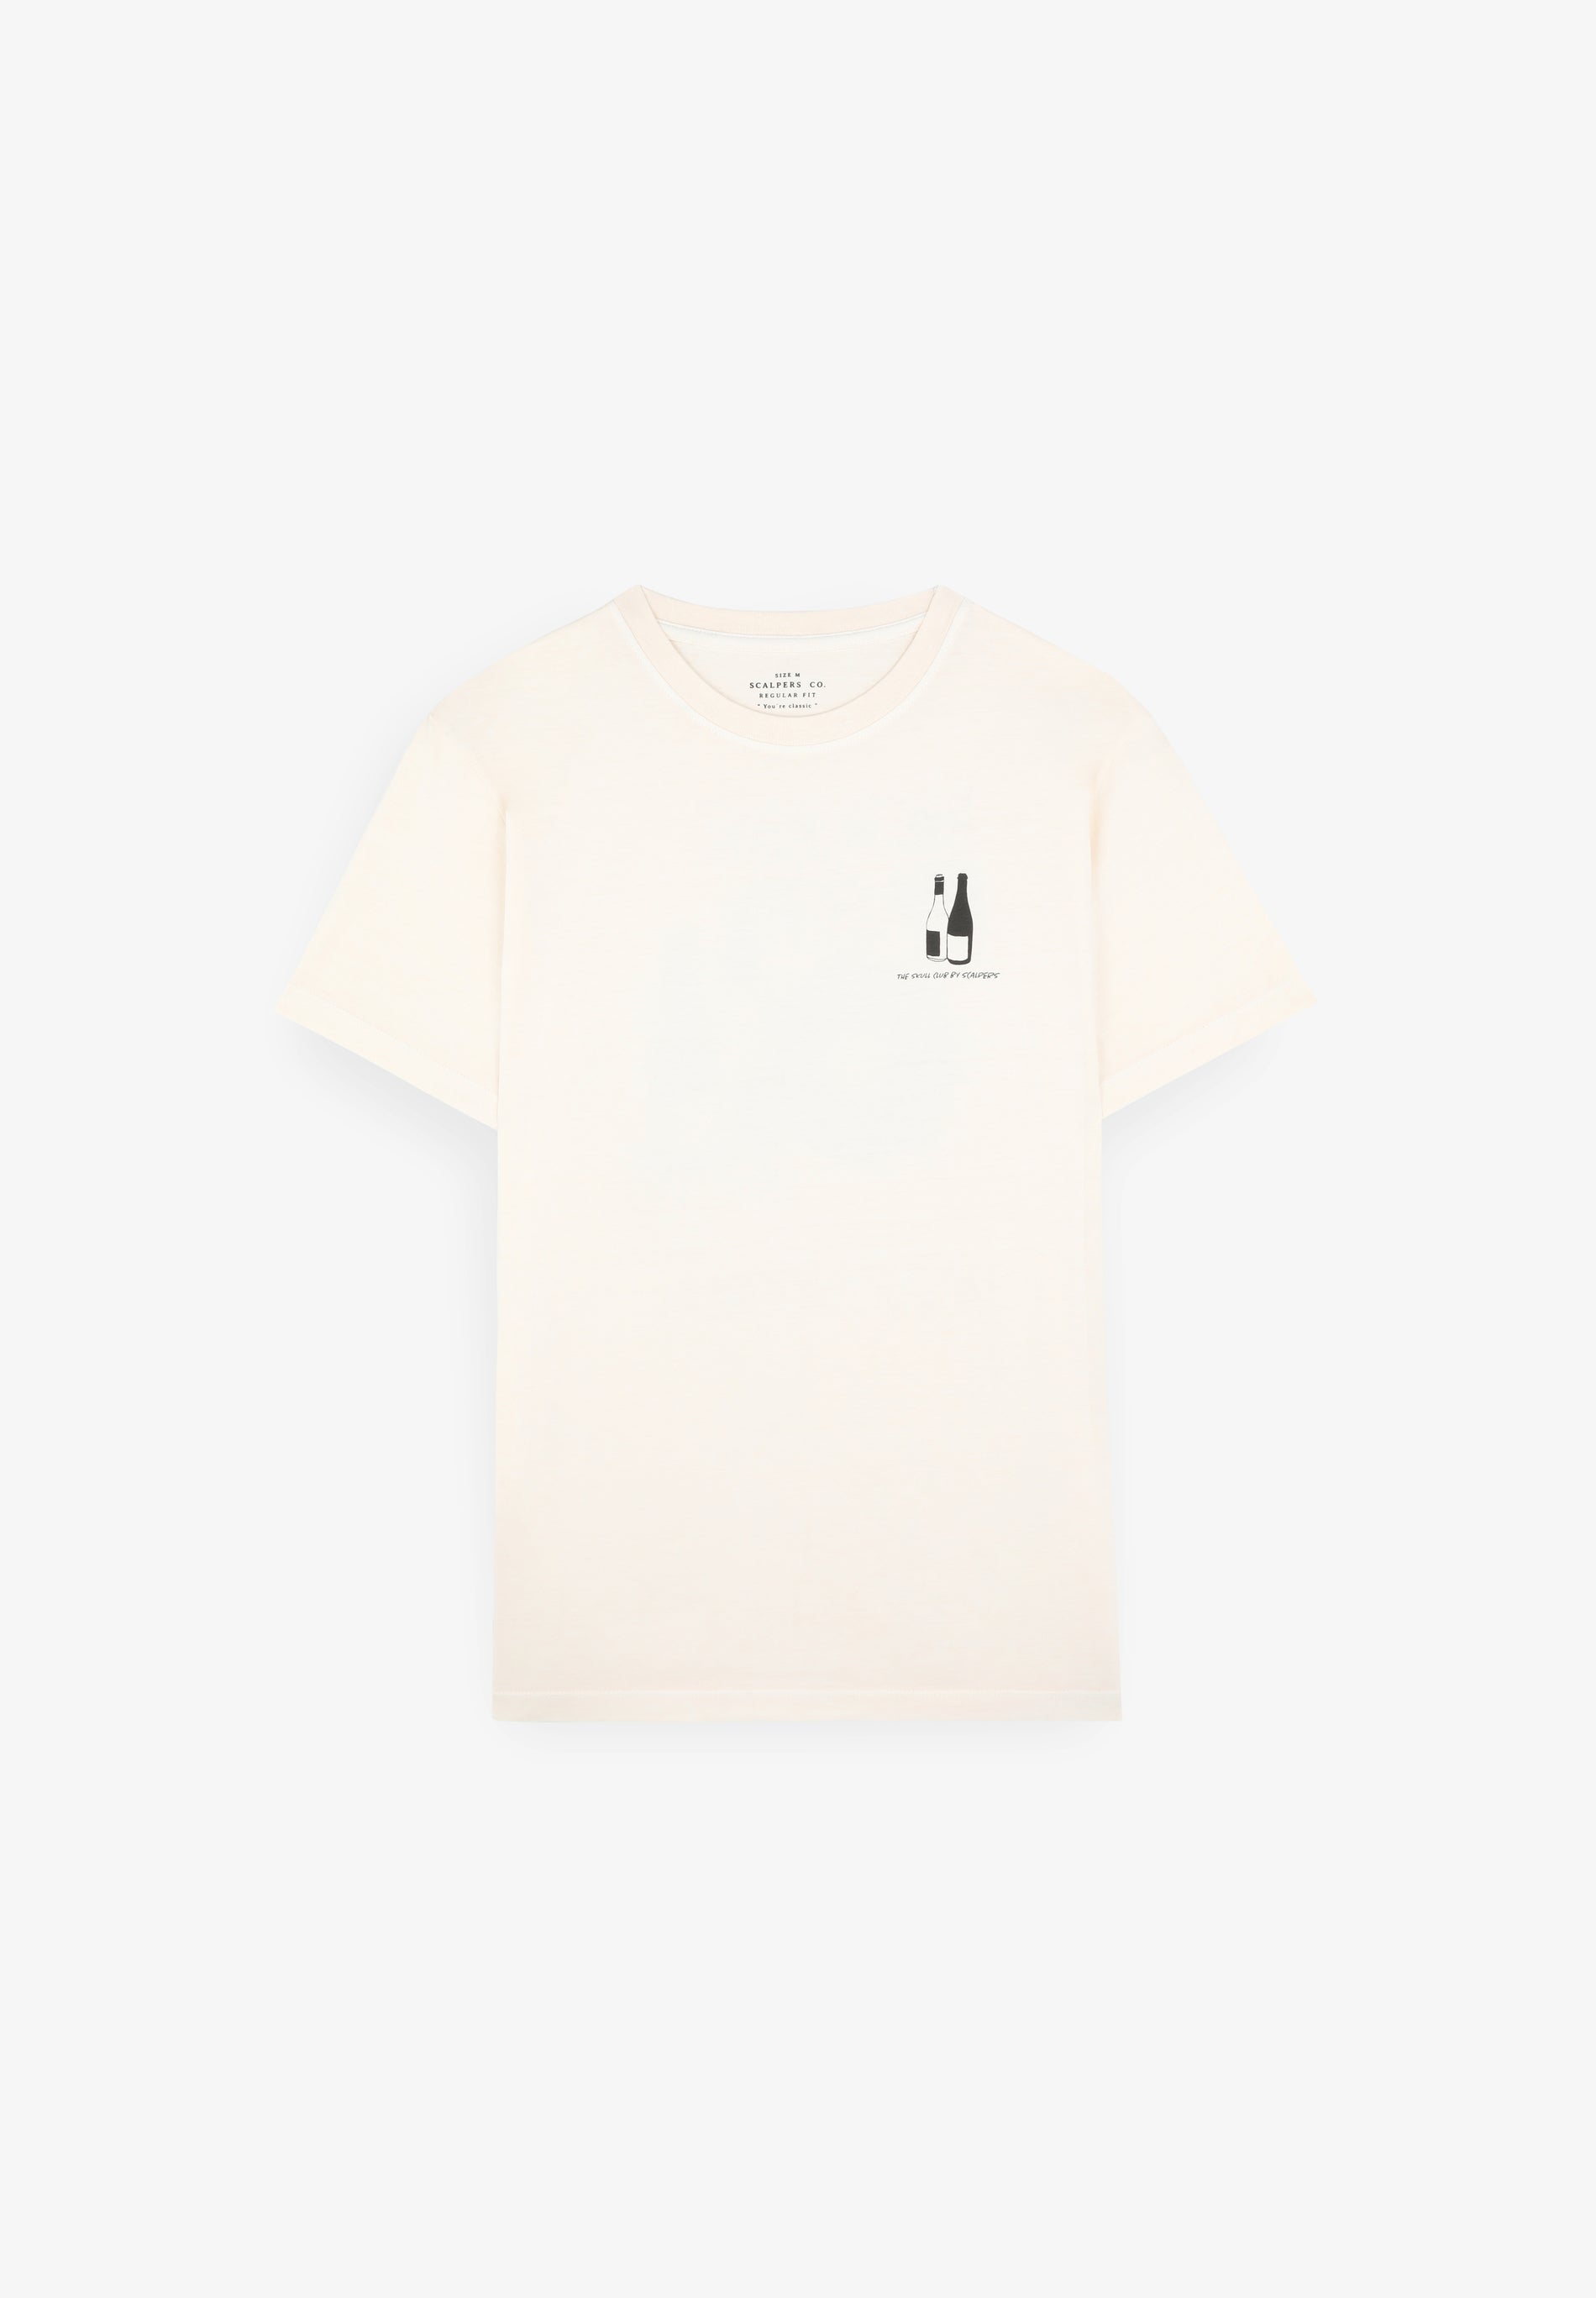 PARTY HOUSE TEE